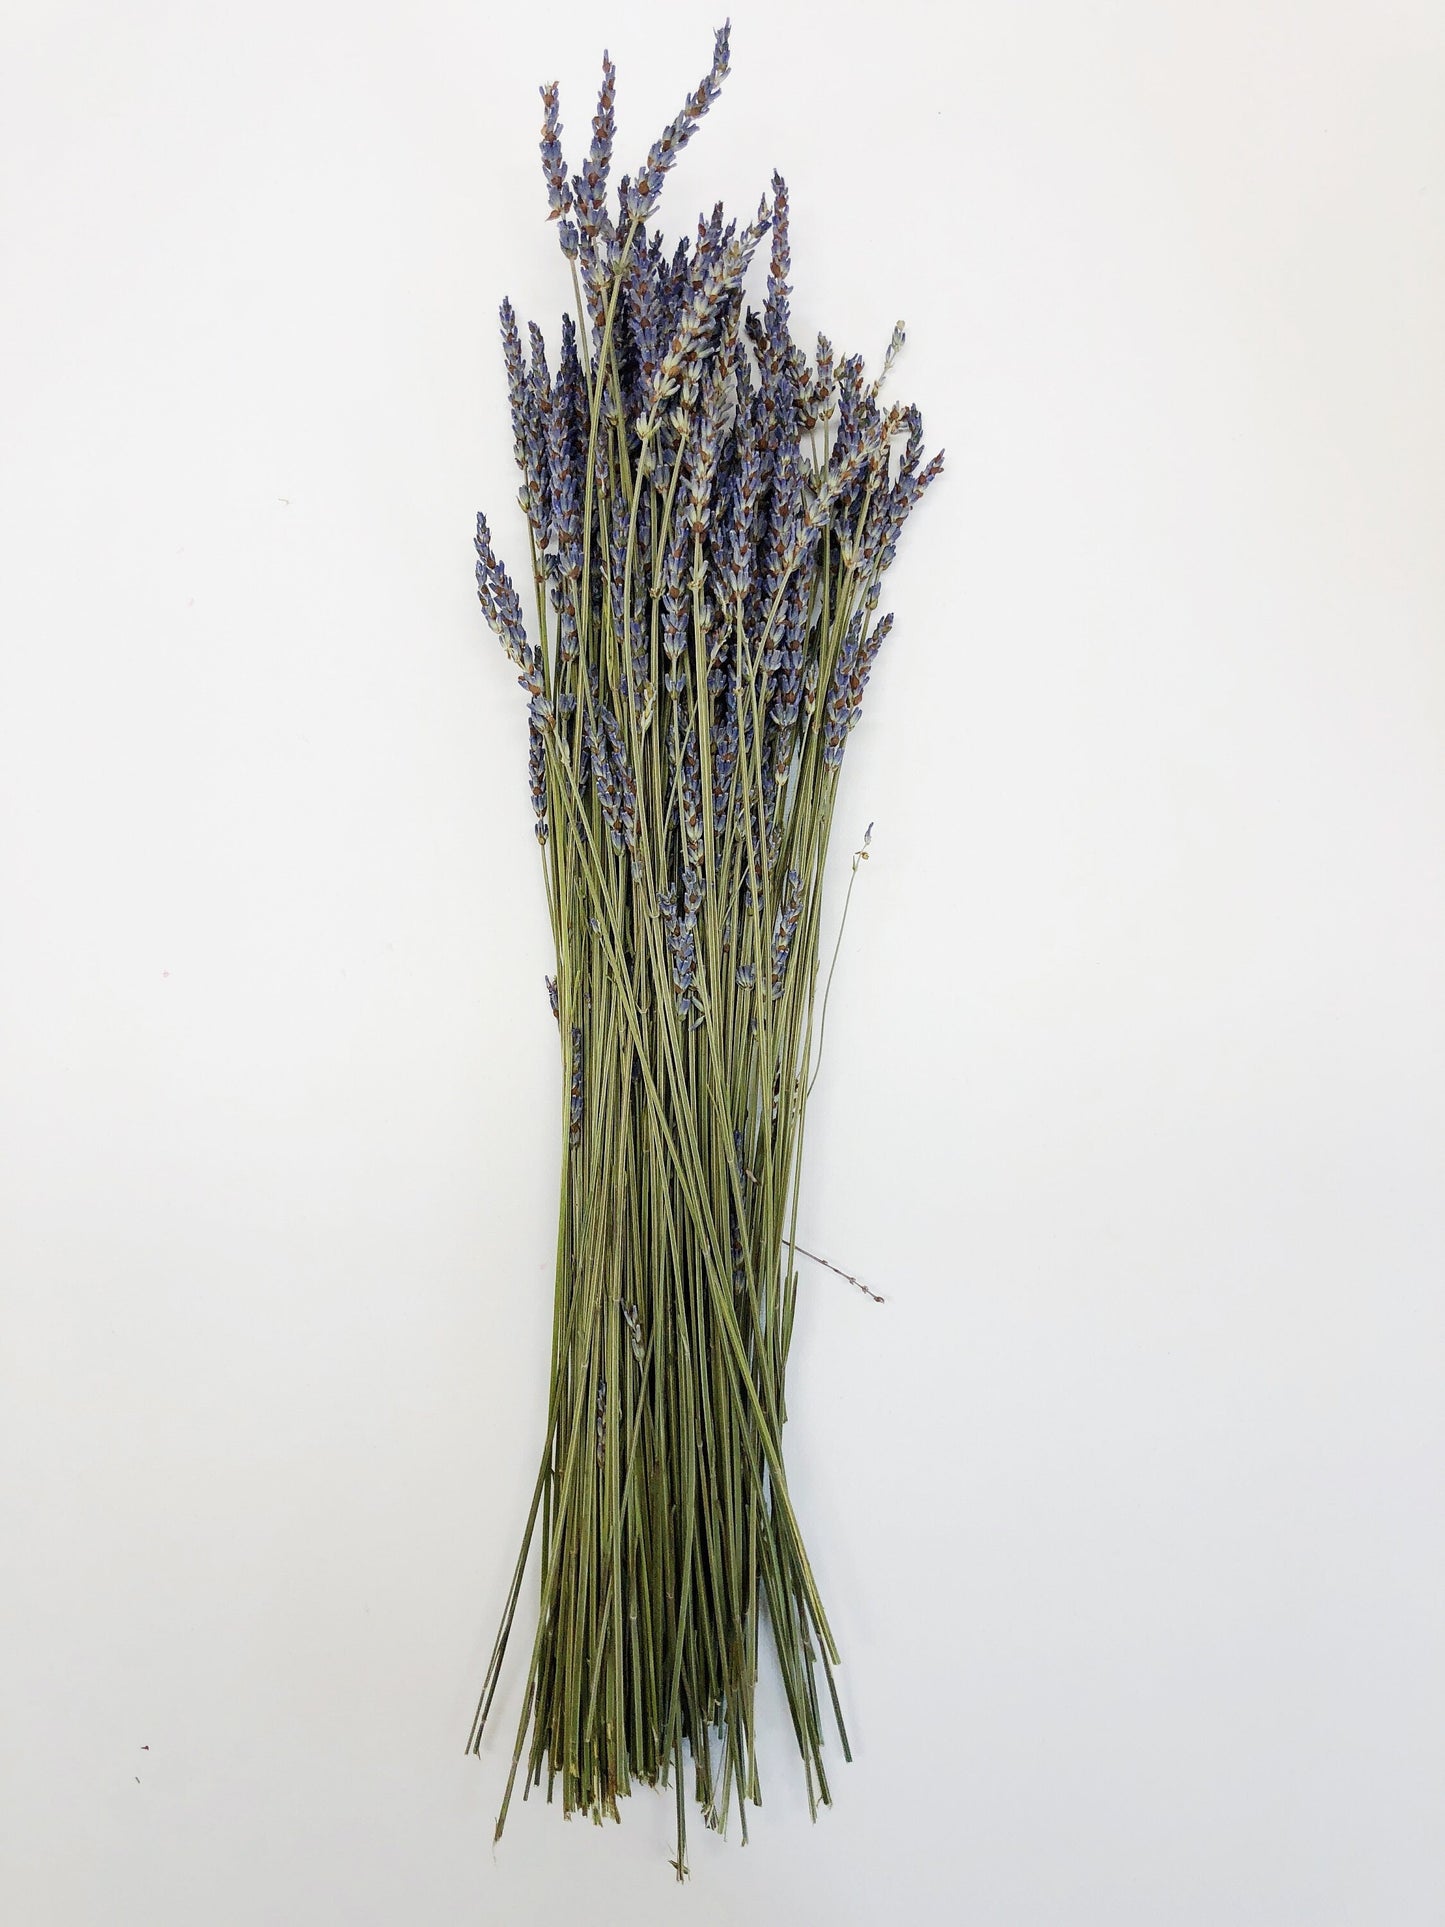 French Lavender, Preserved Flowers, Dried Flower, Lavender, Long Stems, Dried Lavender, Bundles, Wedding, Home Decor, Floral, Flowers